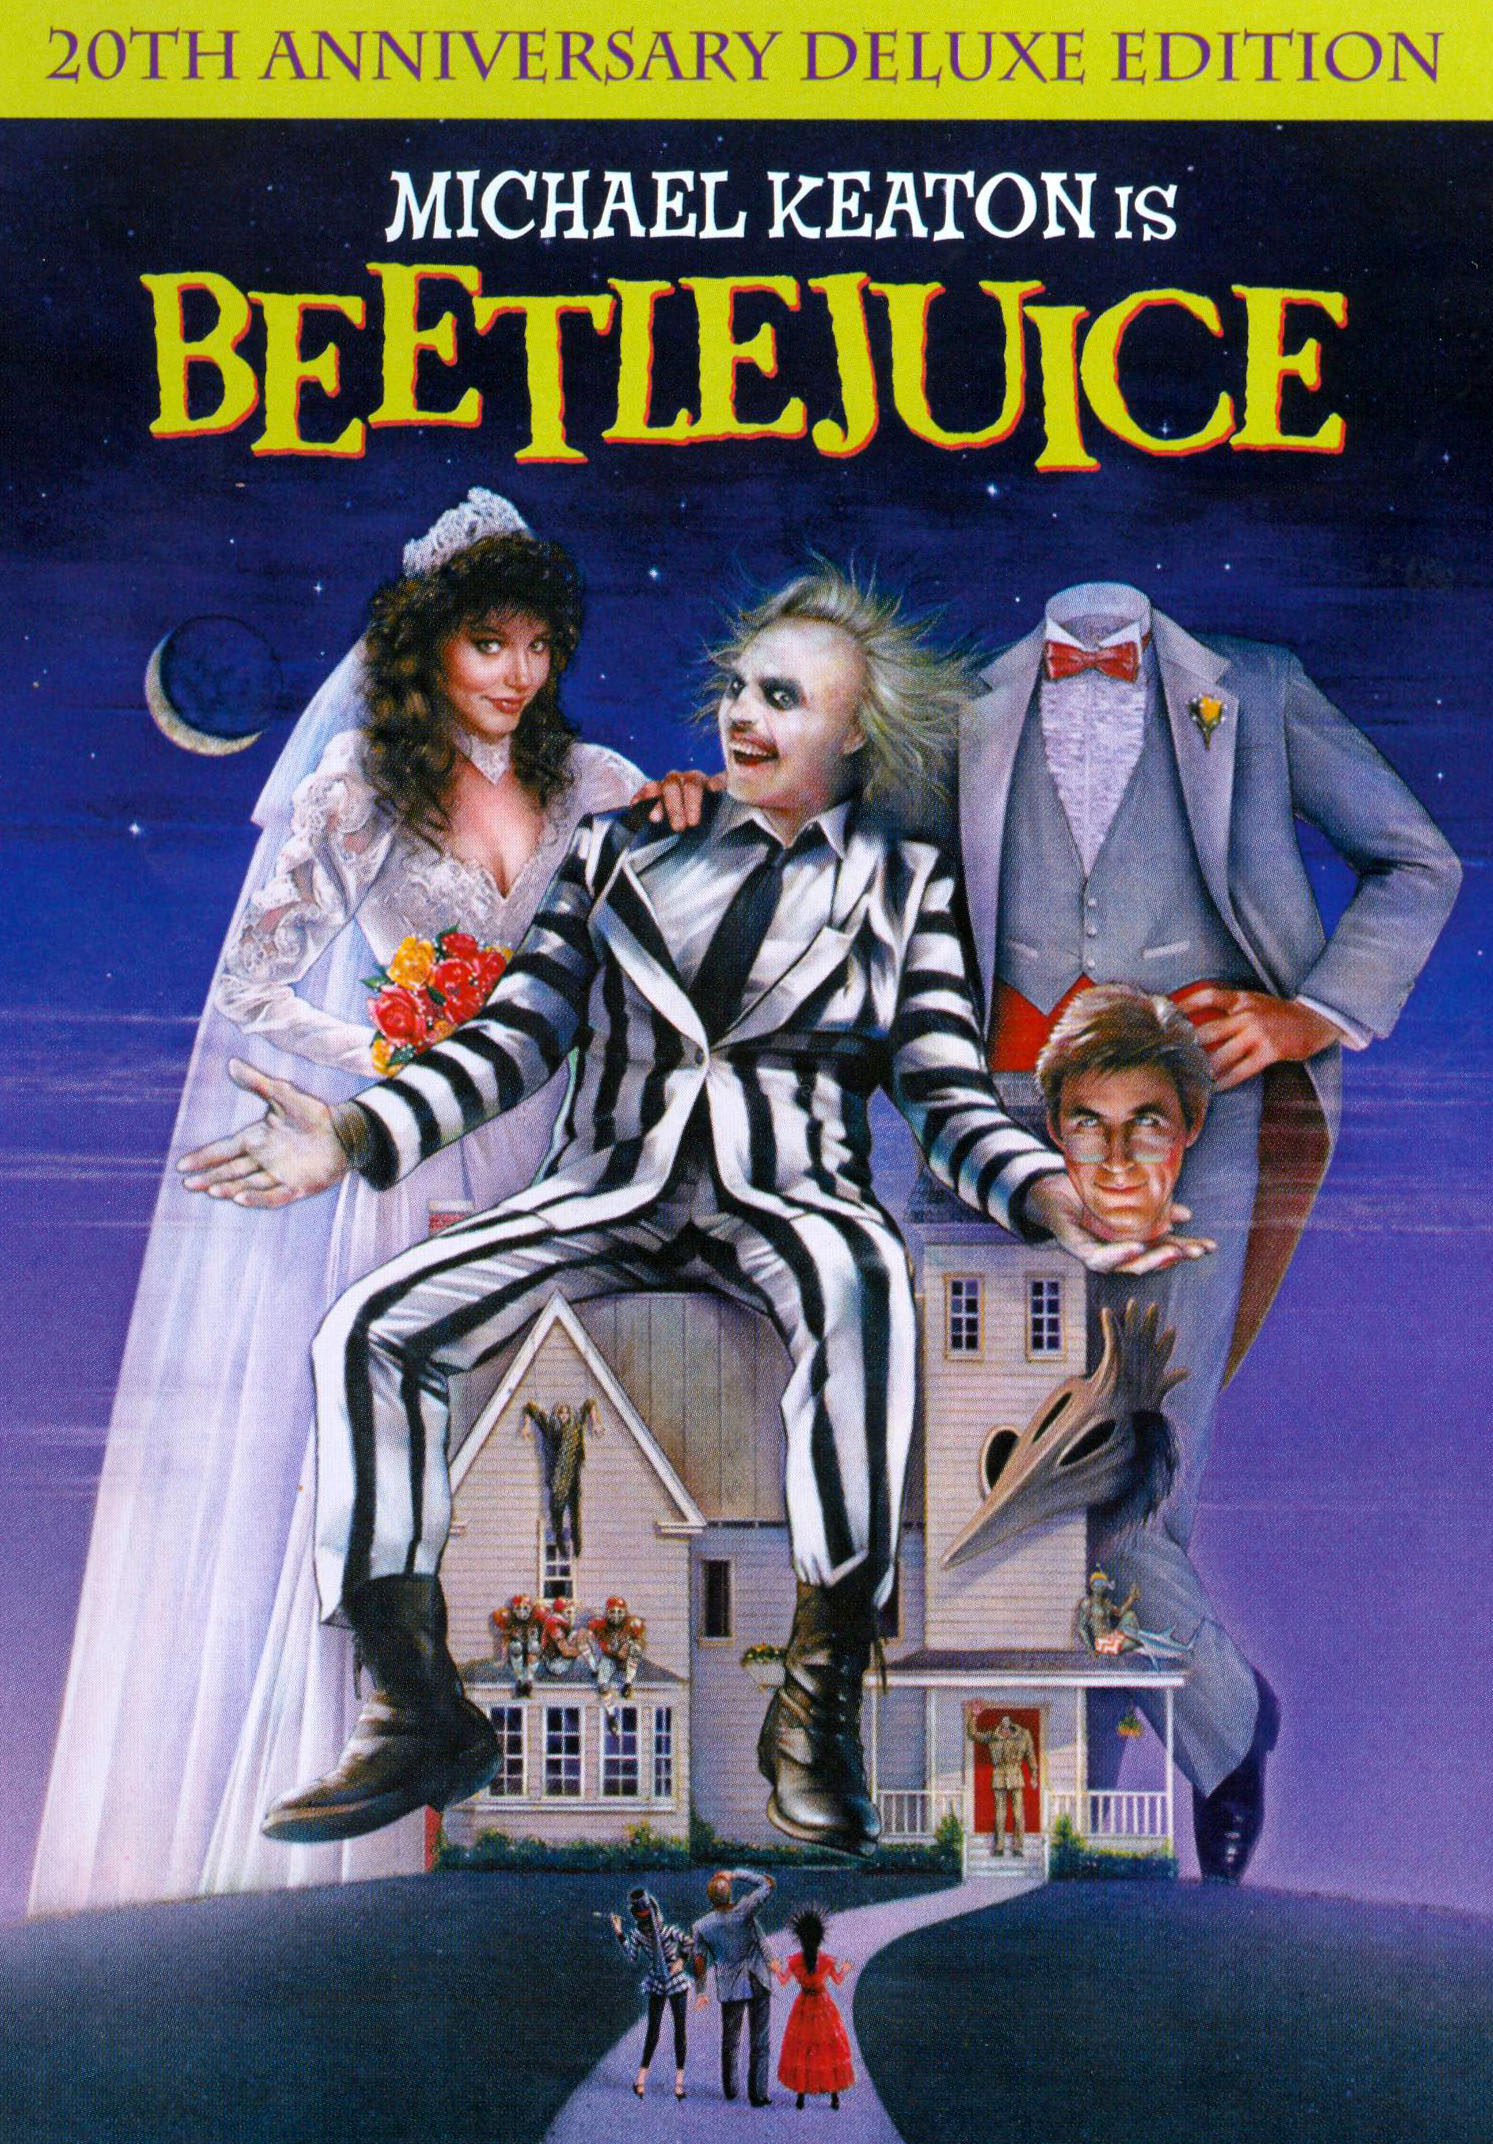 Beetlejuice [20th Anniversary Edition] [Deluxe Edition] [DVD] [1988]